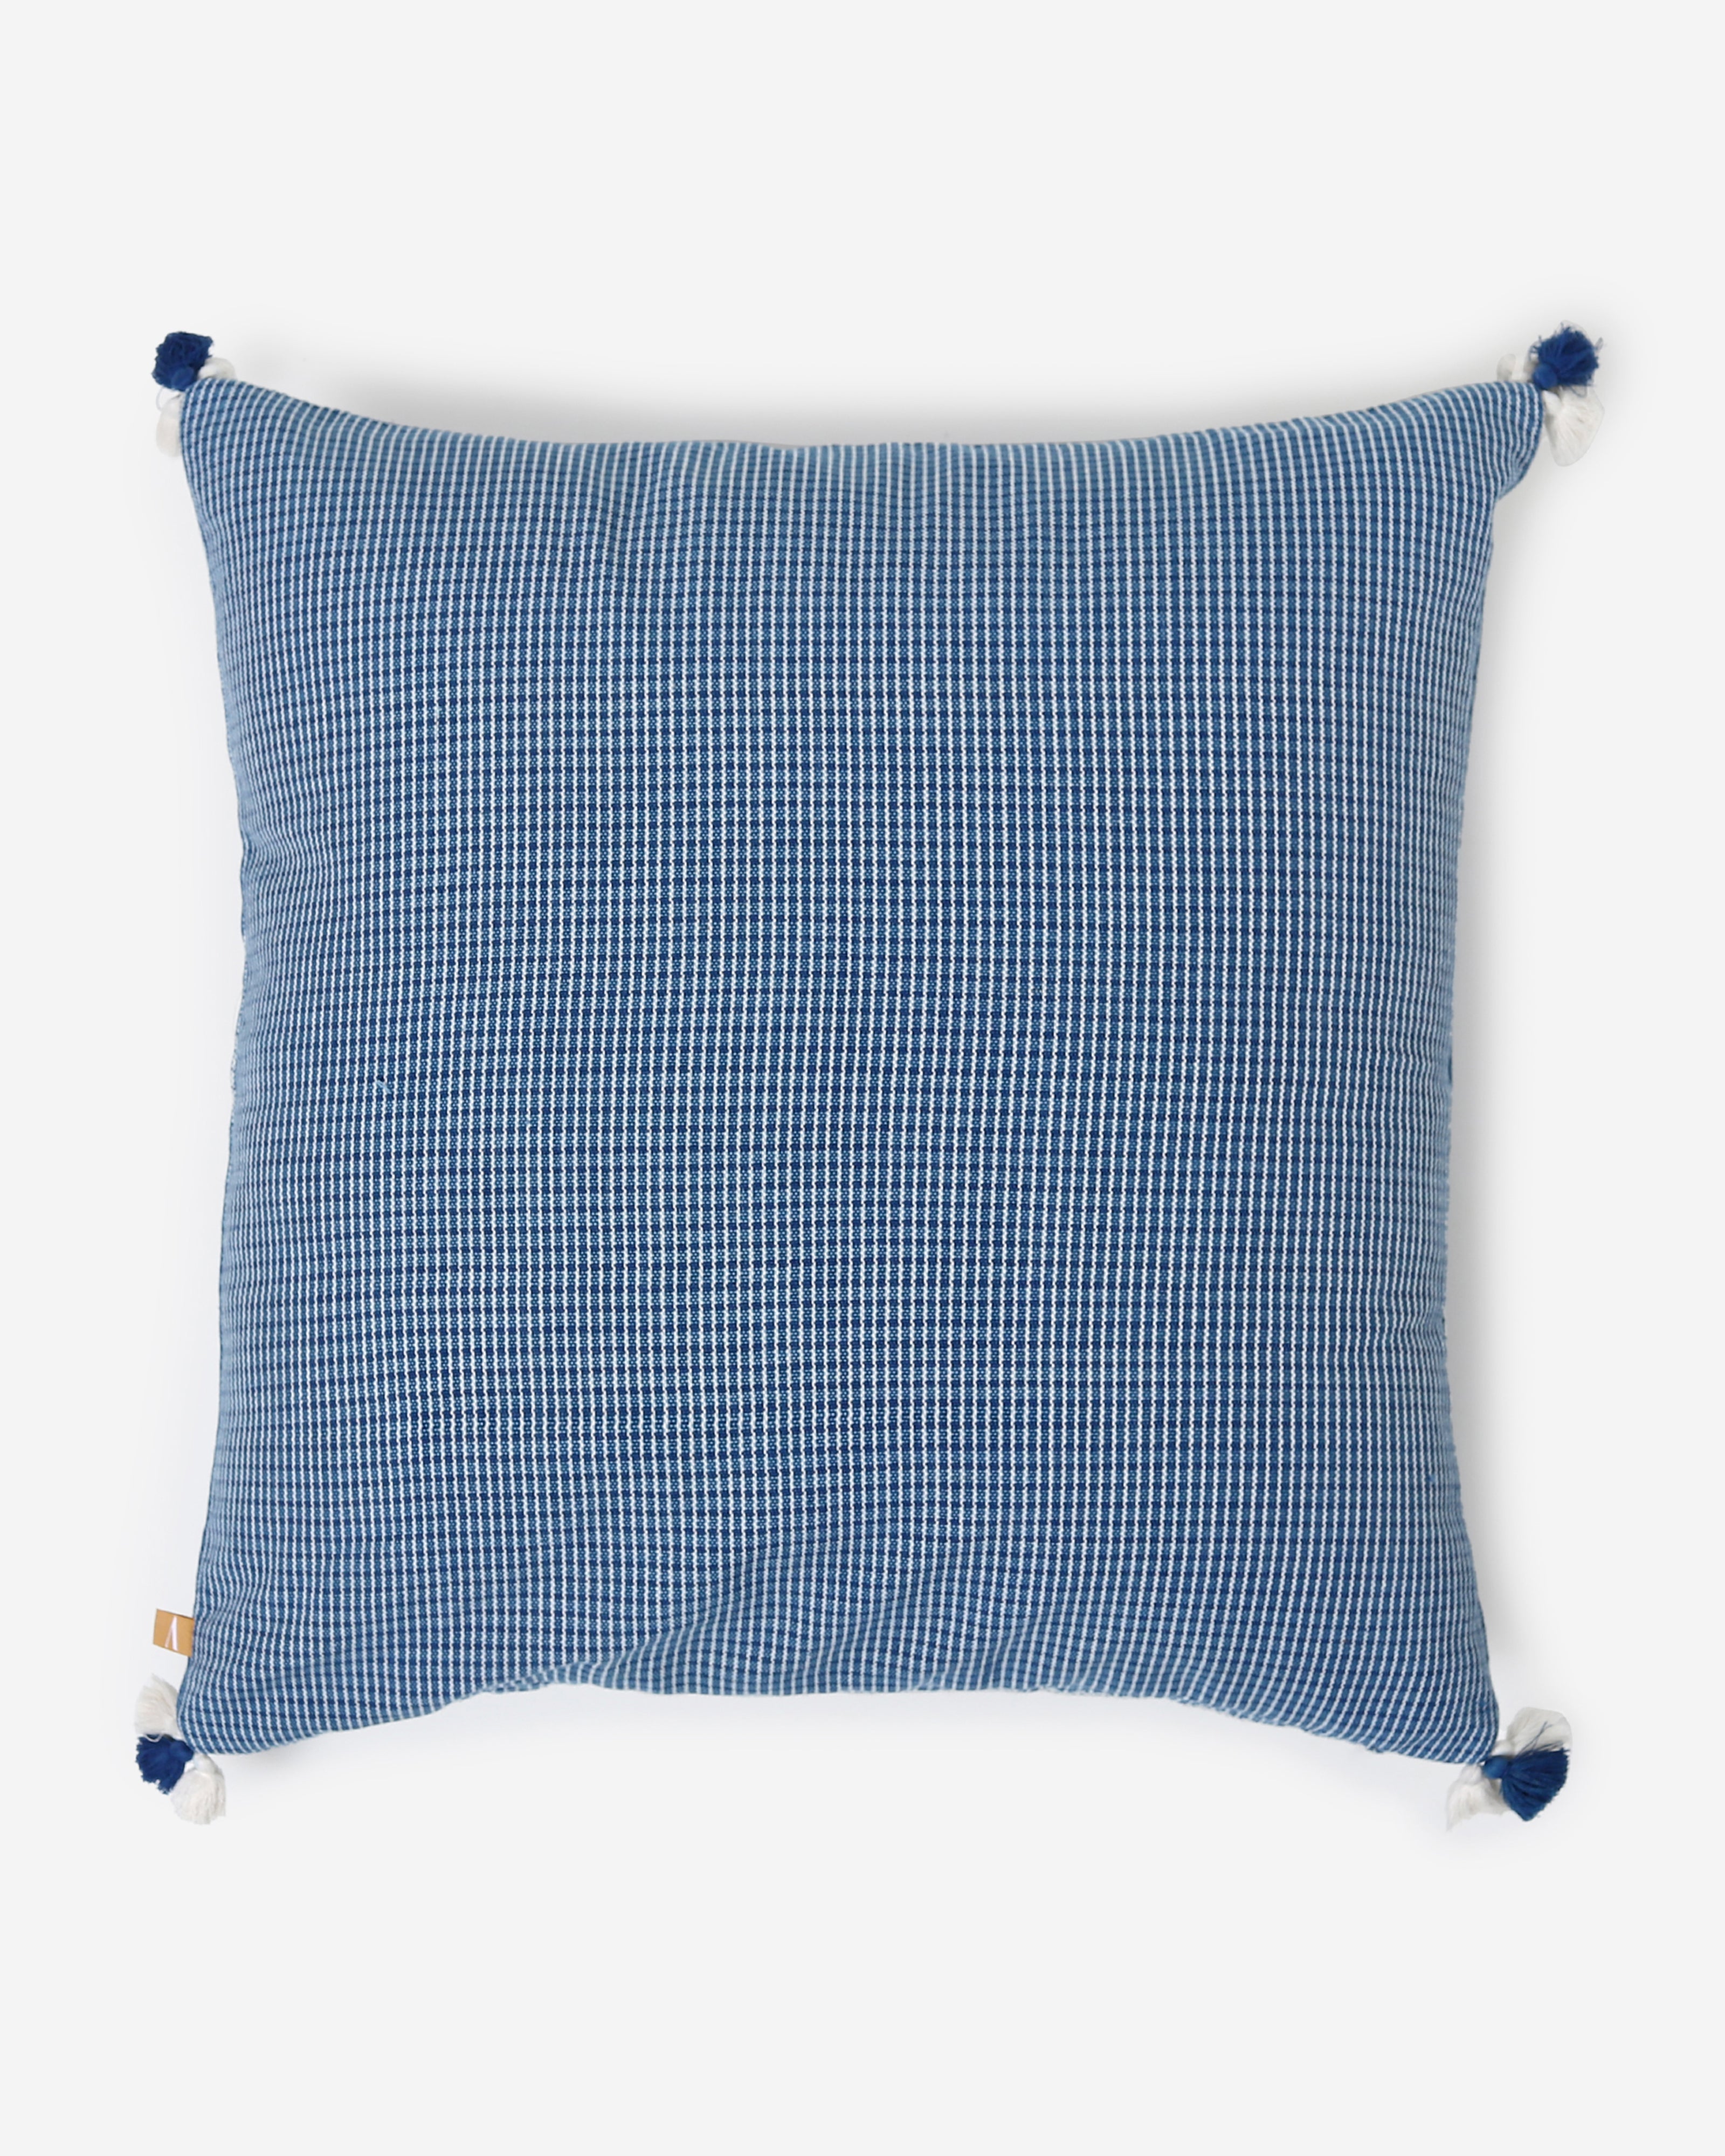 Jhilmil Extra Weft Cotton Cushion Cover